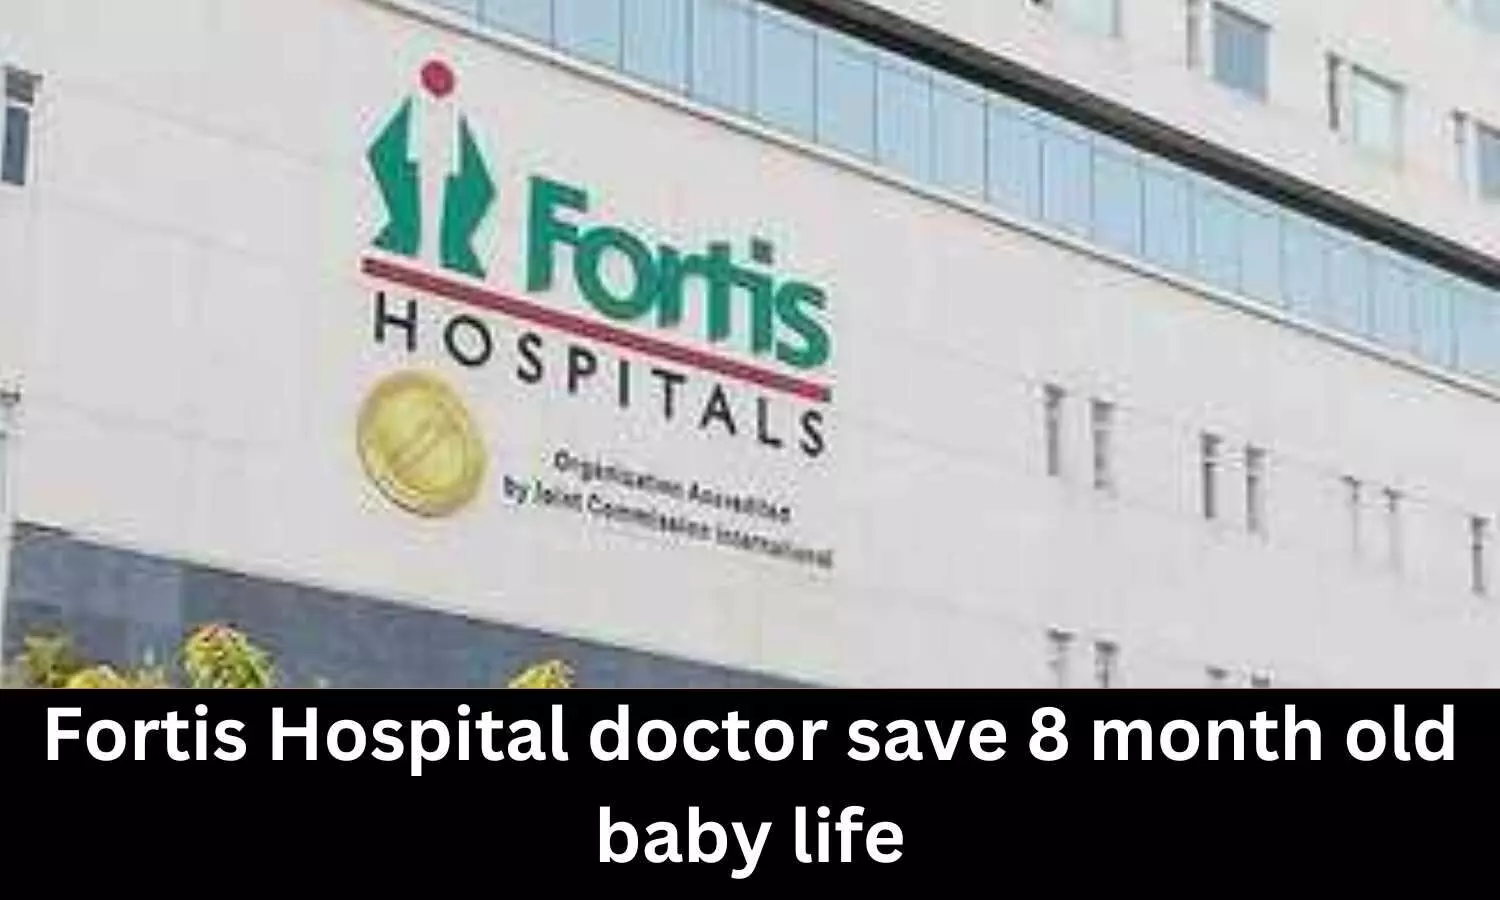 Fortis Hospital doctors save life of 8-month-old baby who swallowed 2cm bottle cork